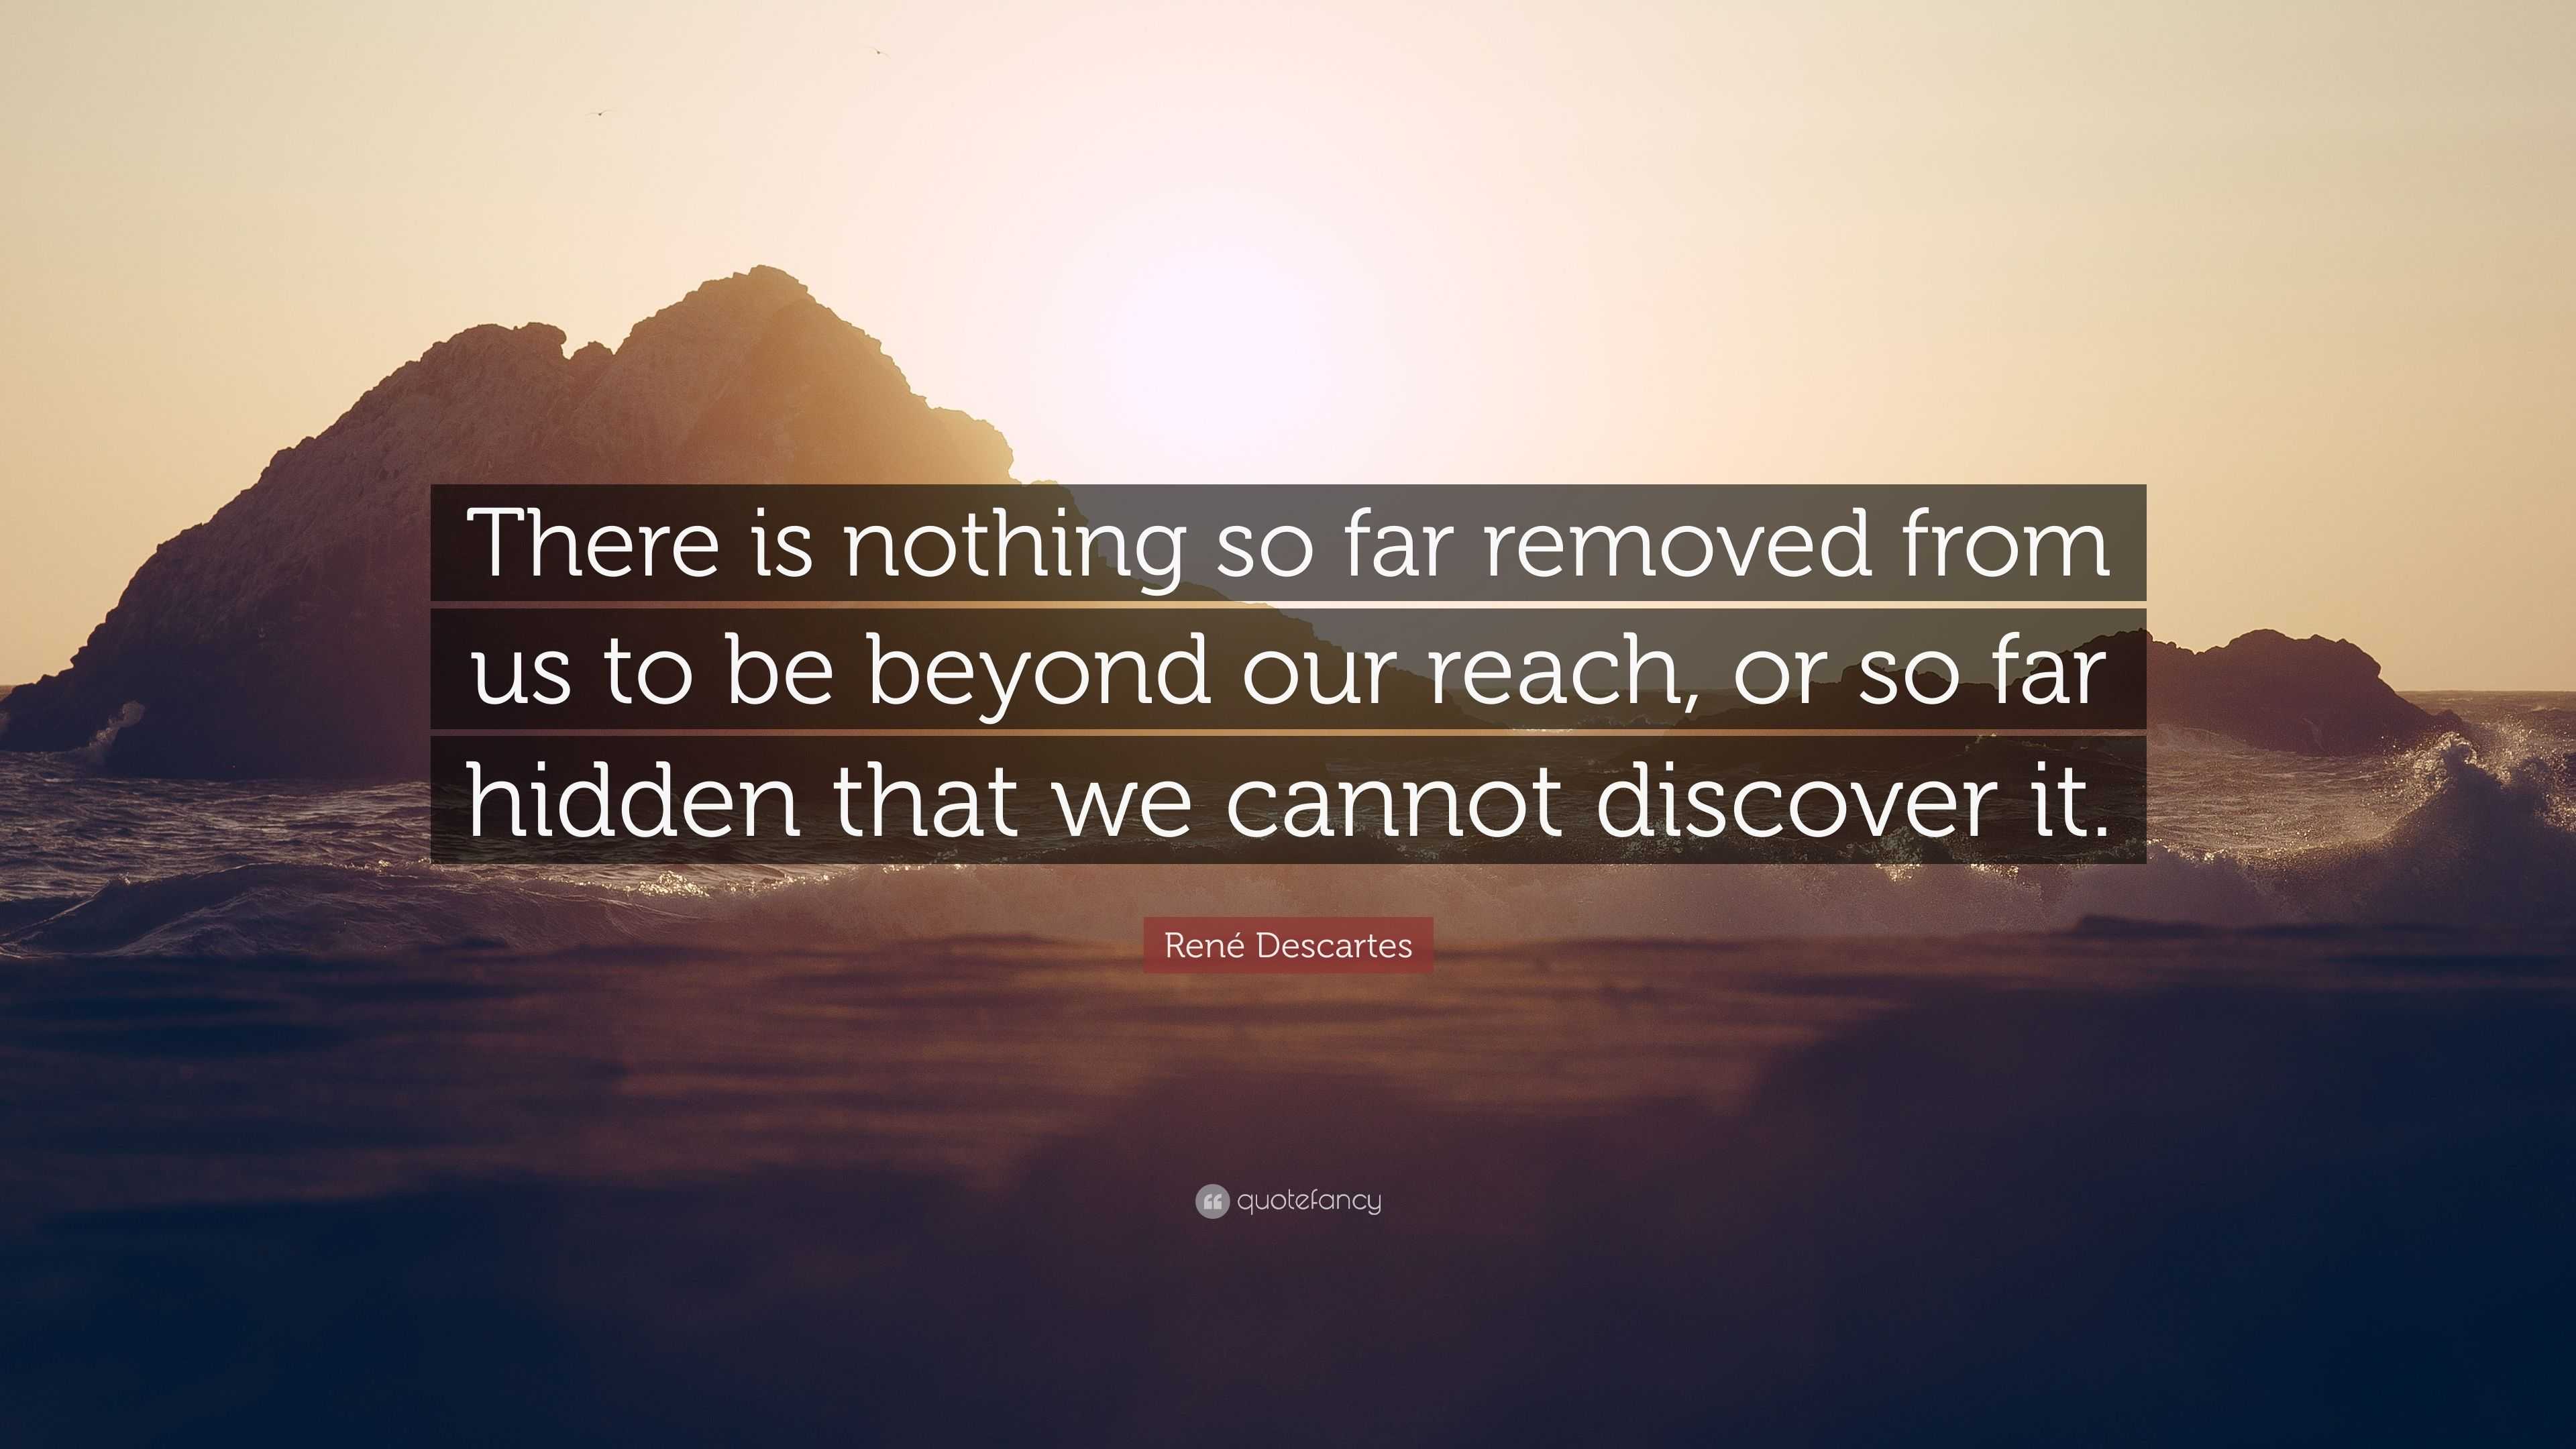 René Descartes Quote: “There is nothing so far removed from us to be ...